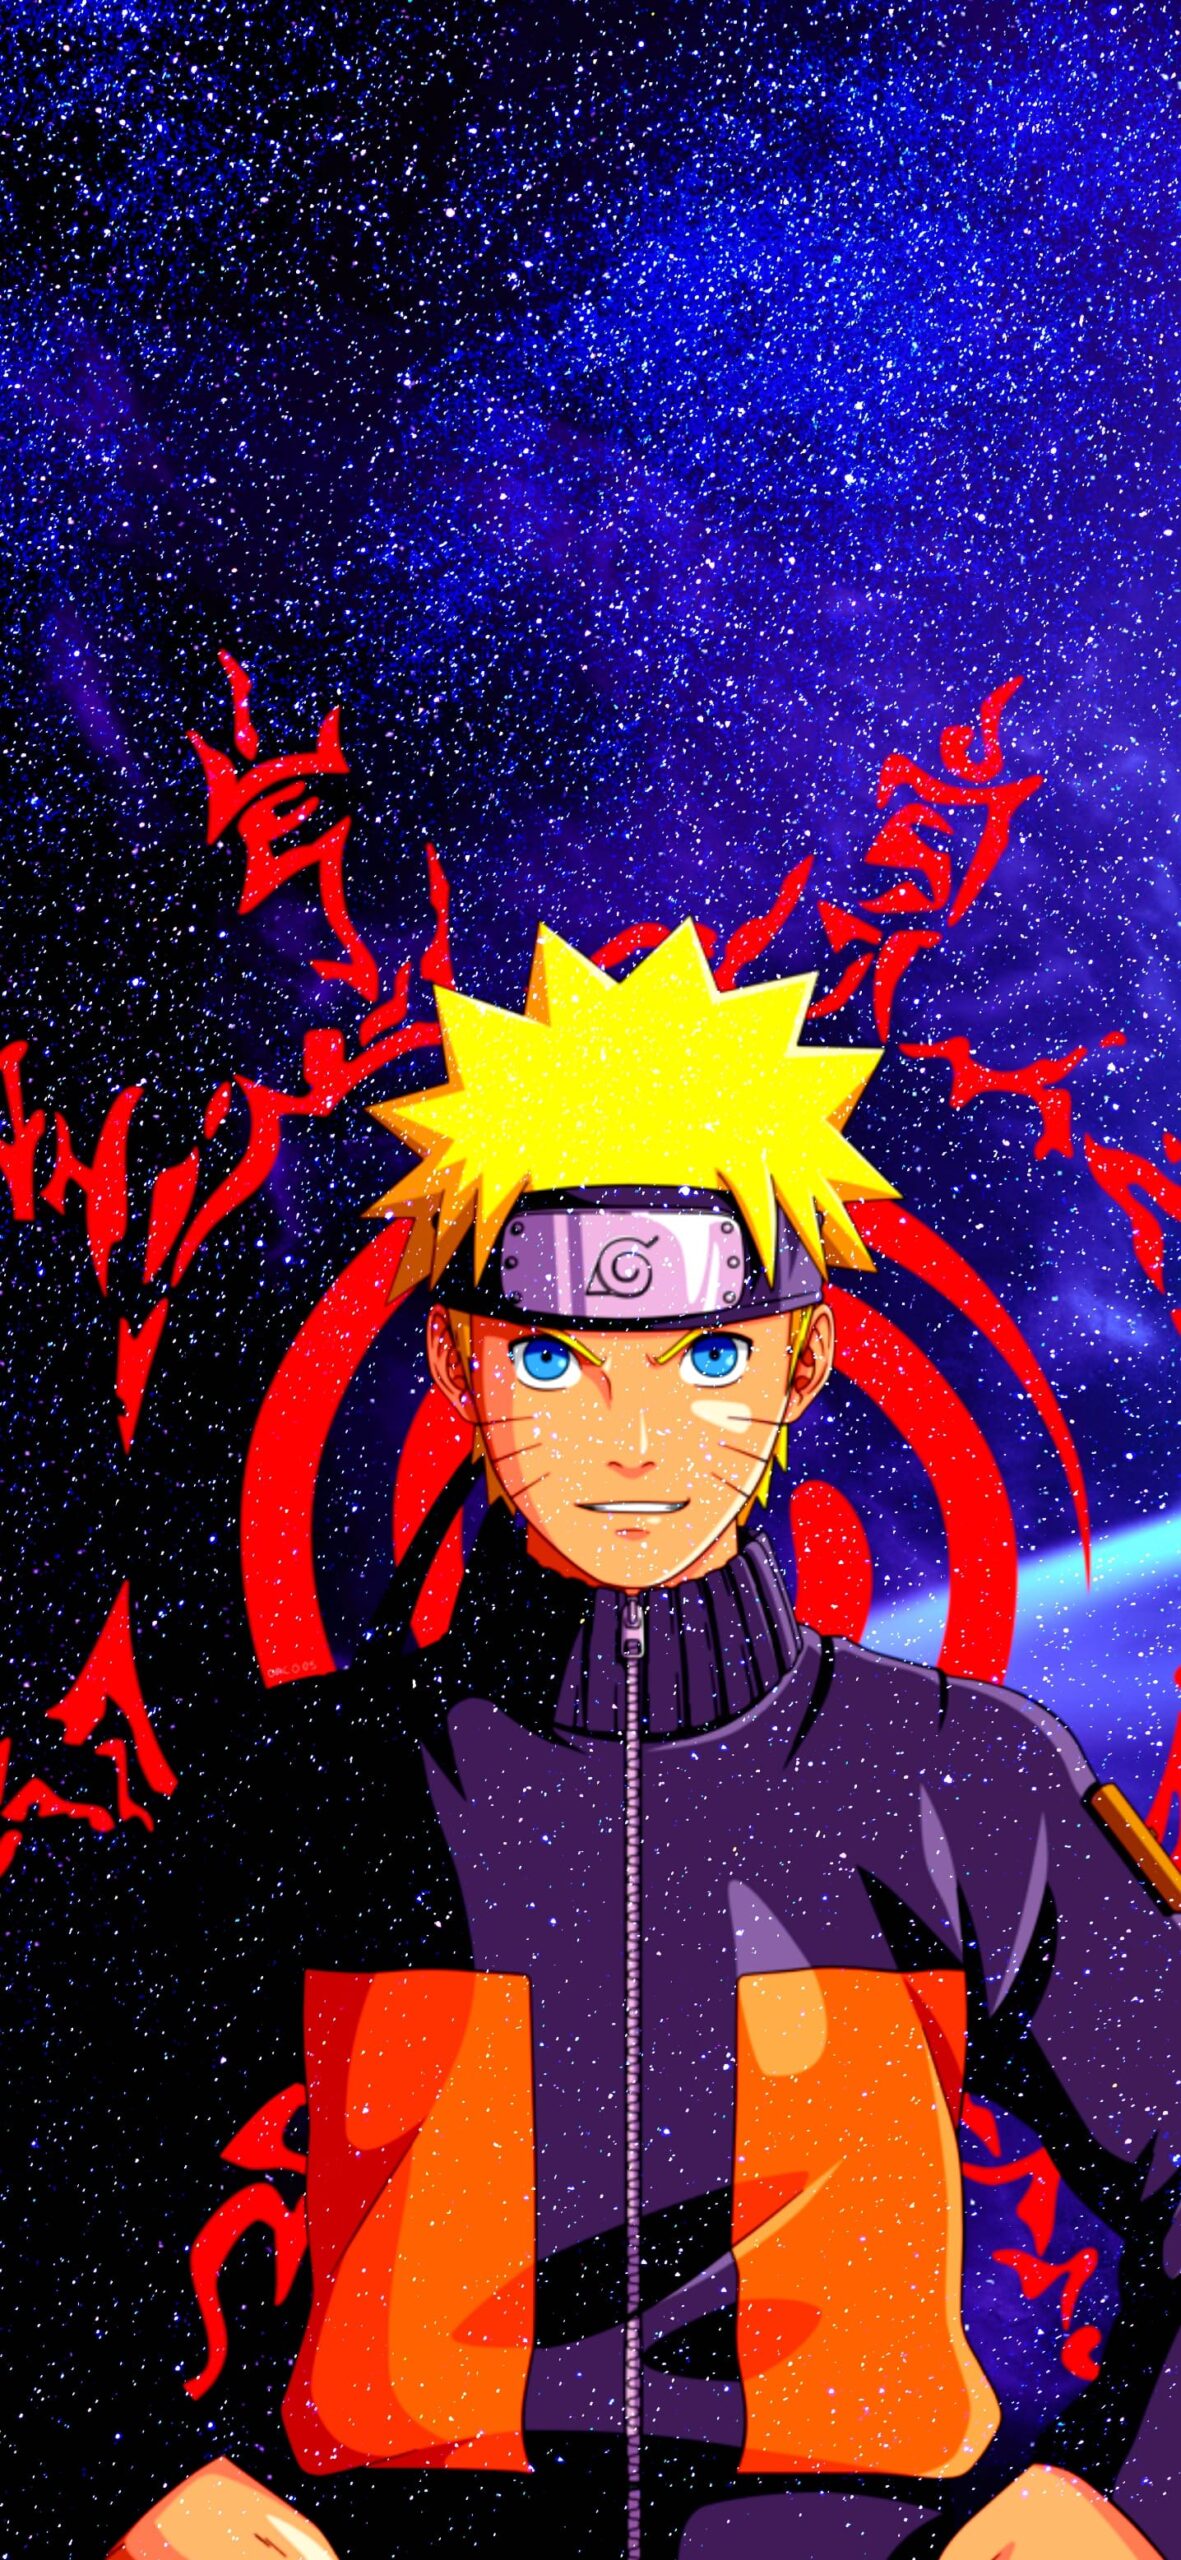 200+] Naruto Iphone Wallpapers | Wallpapers.com